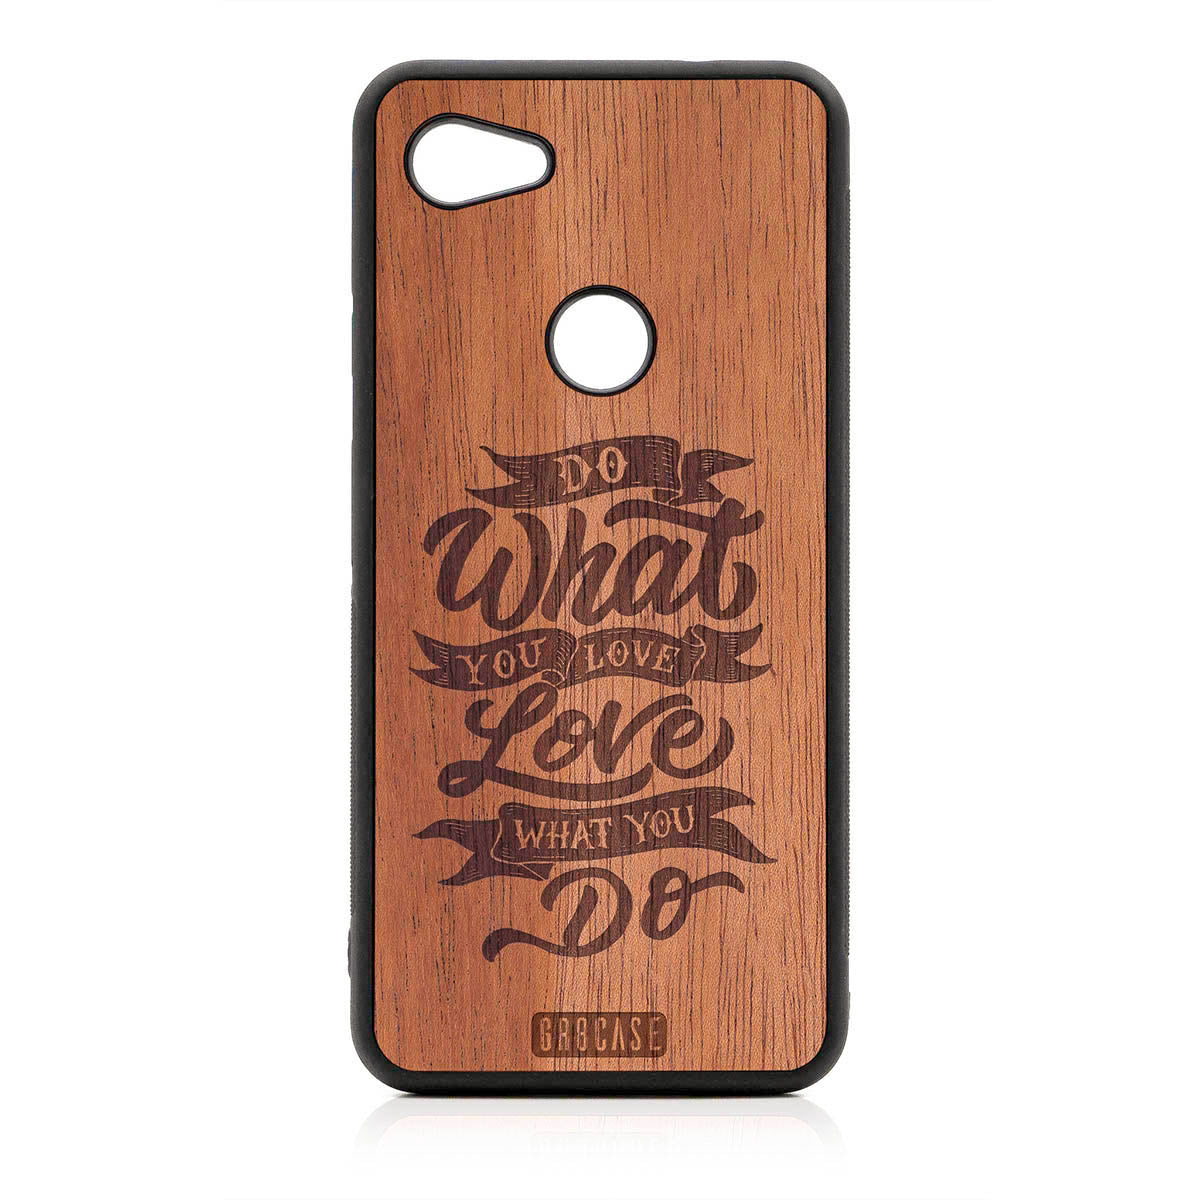 Do What You Love Love What You Do Design Wood Case For Google Pixel 3A by GR8CASE